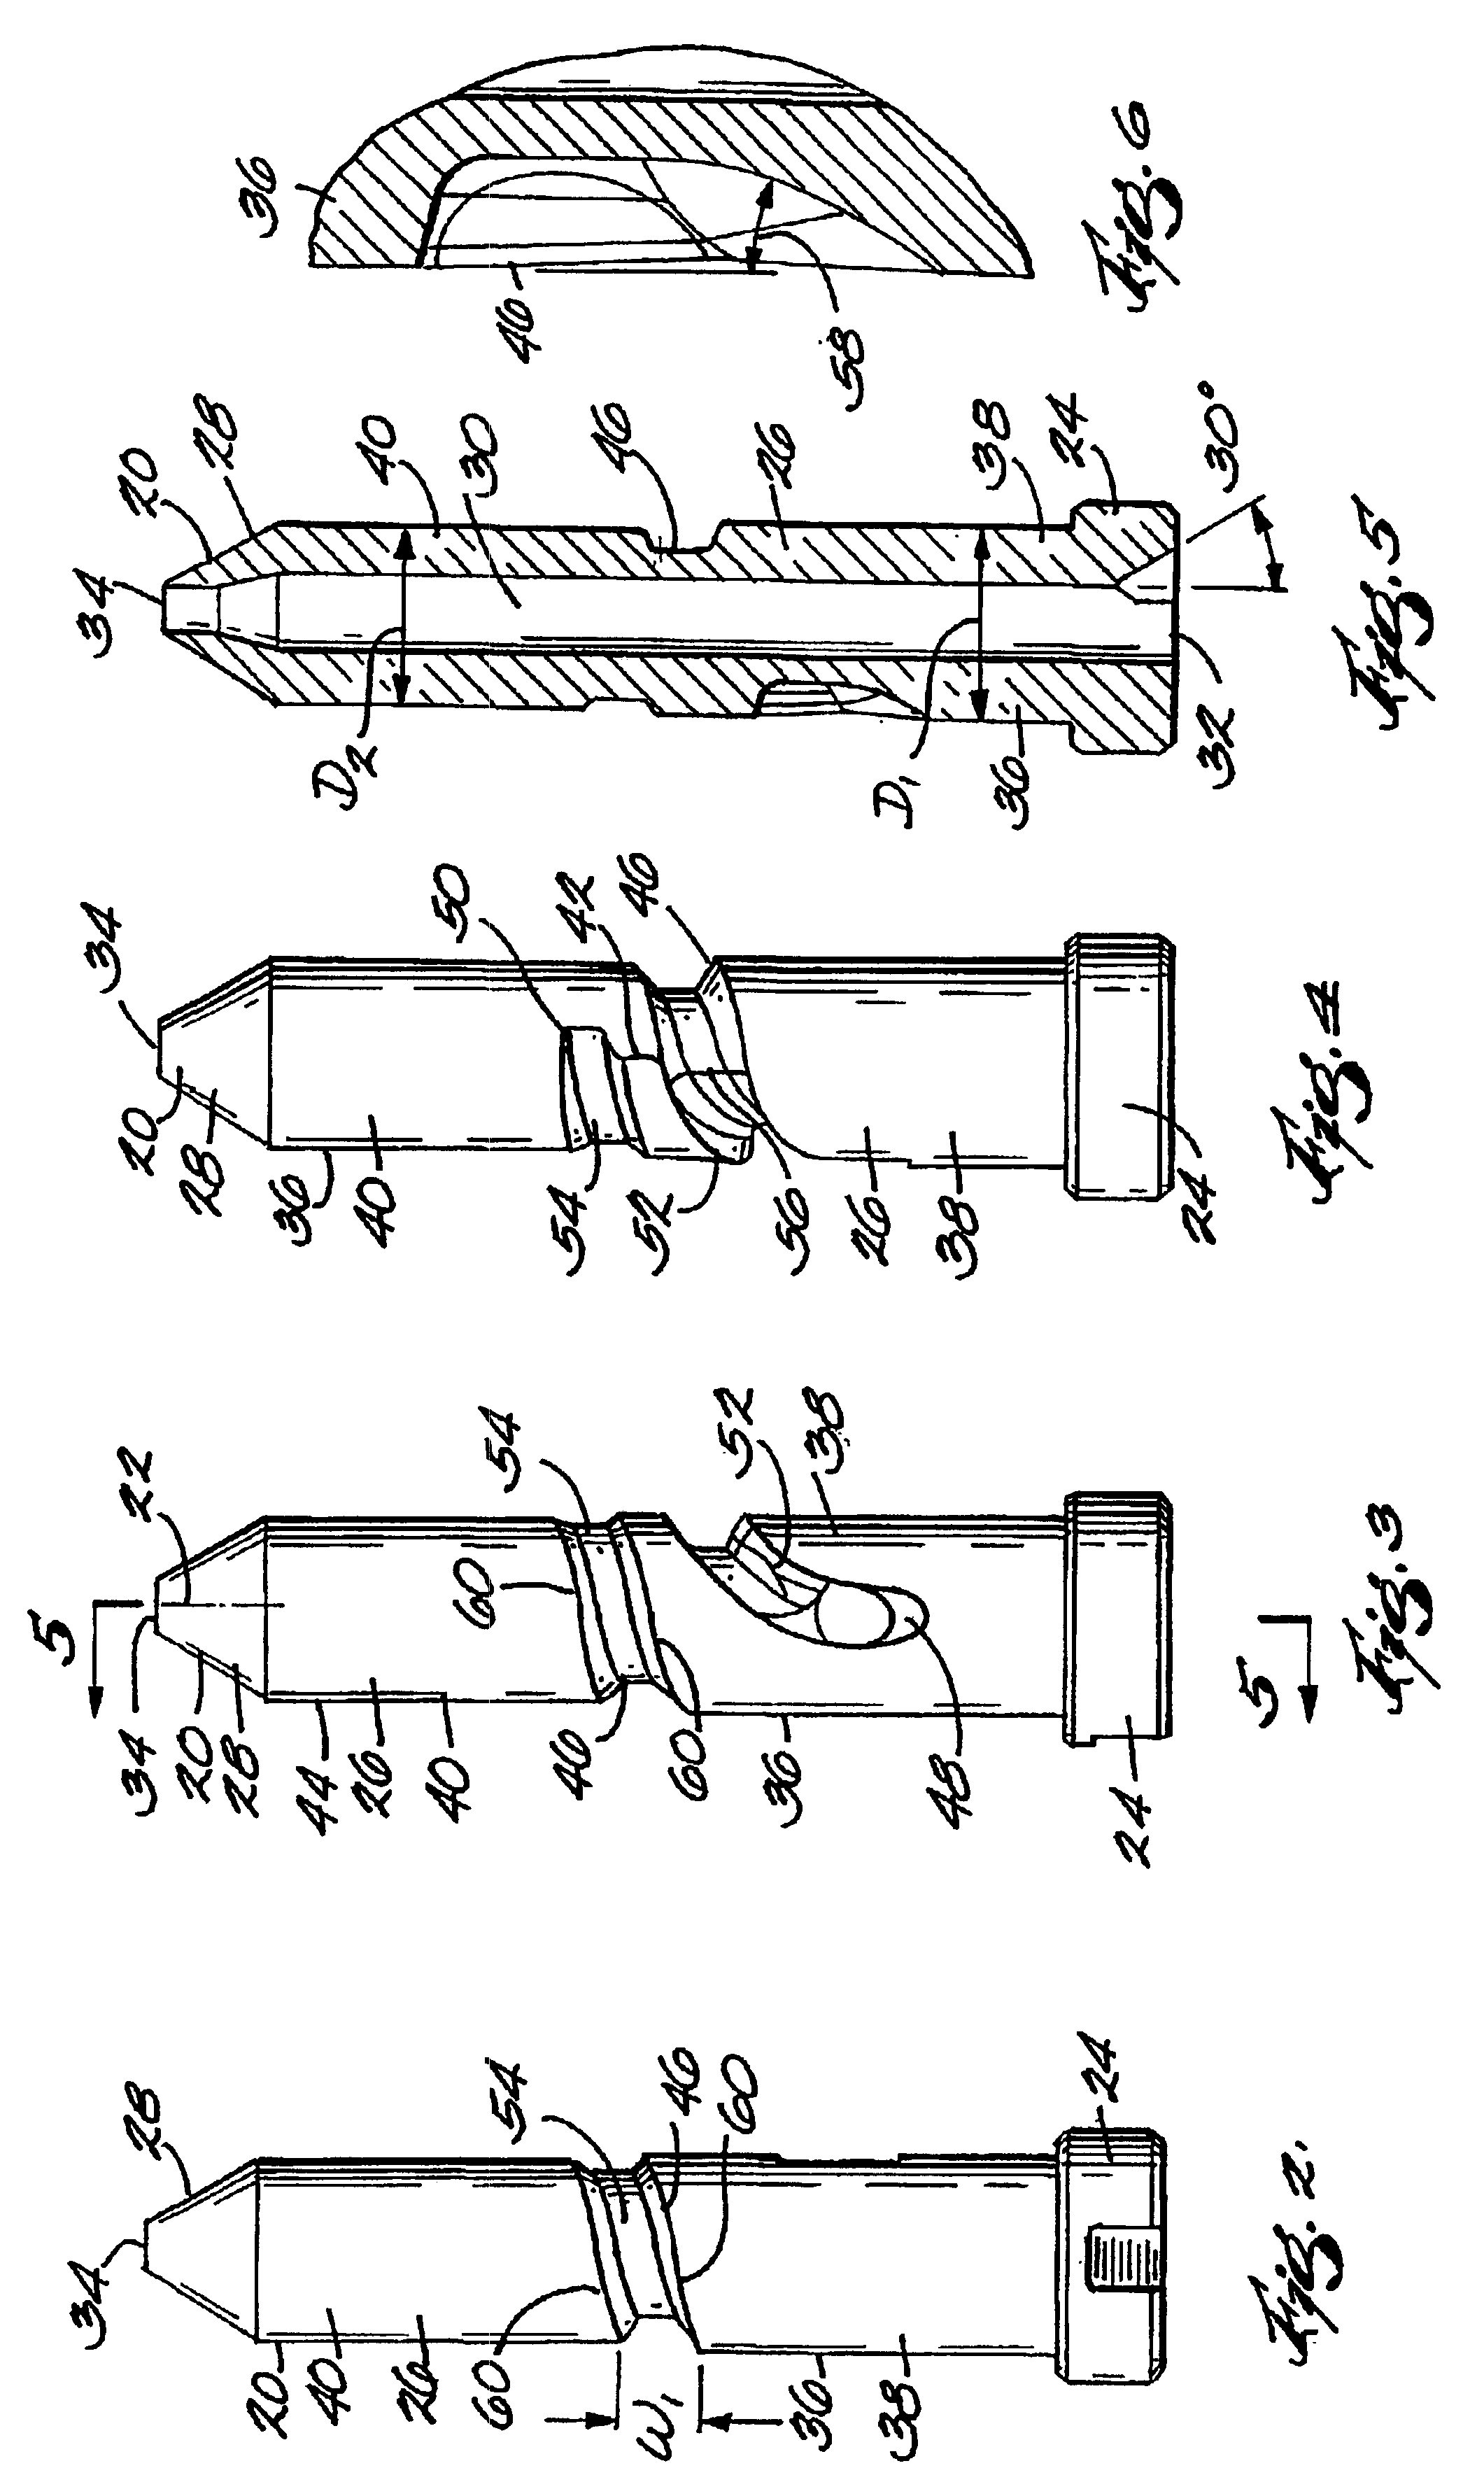 Co-injection apparatus for injection molding